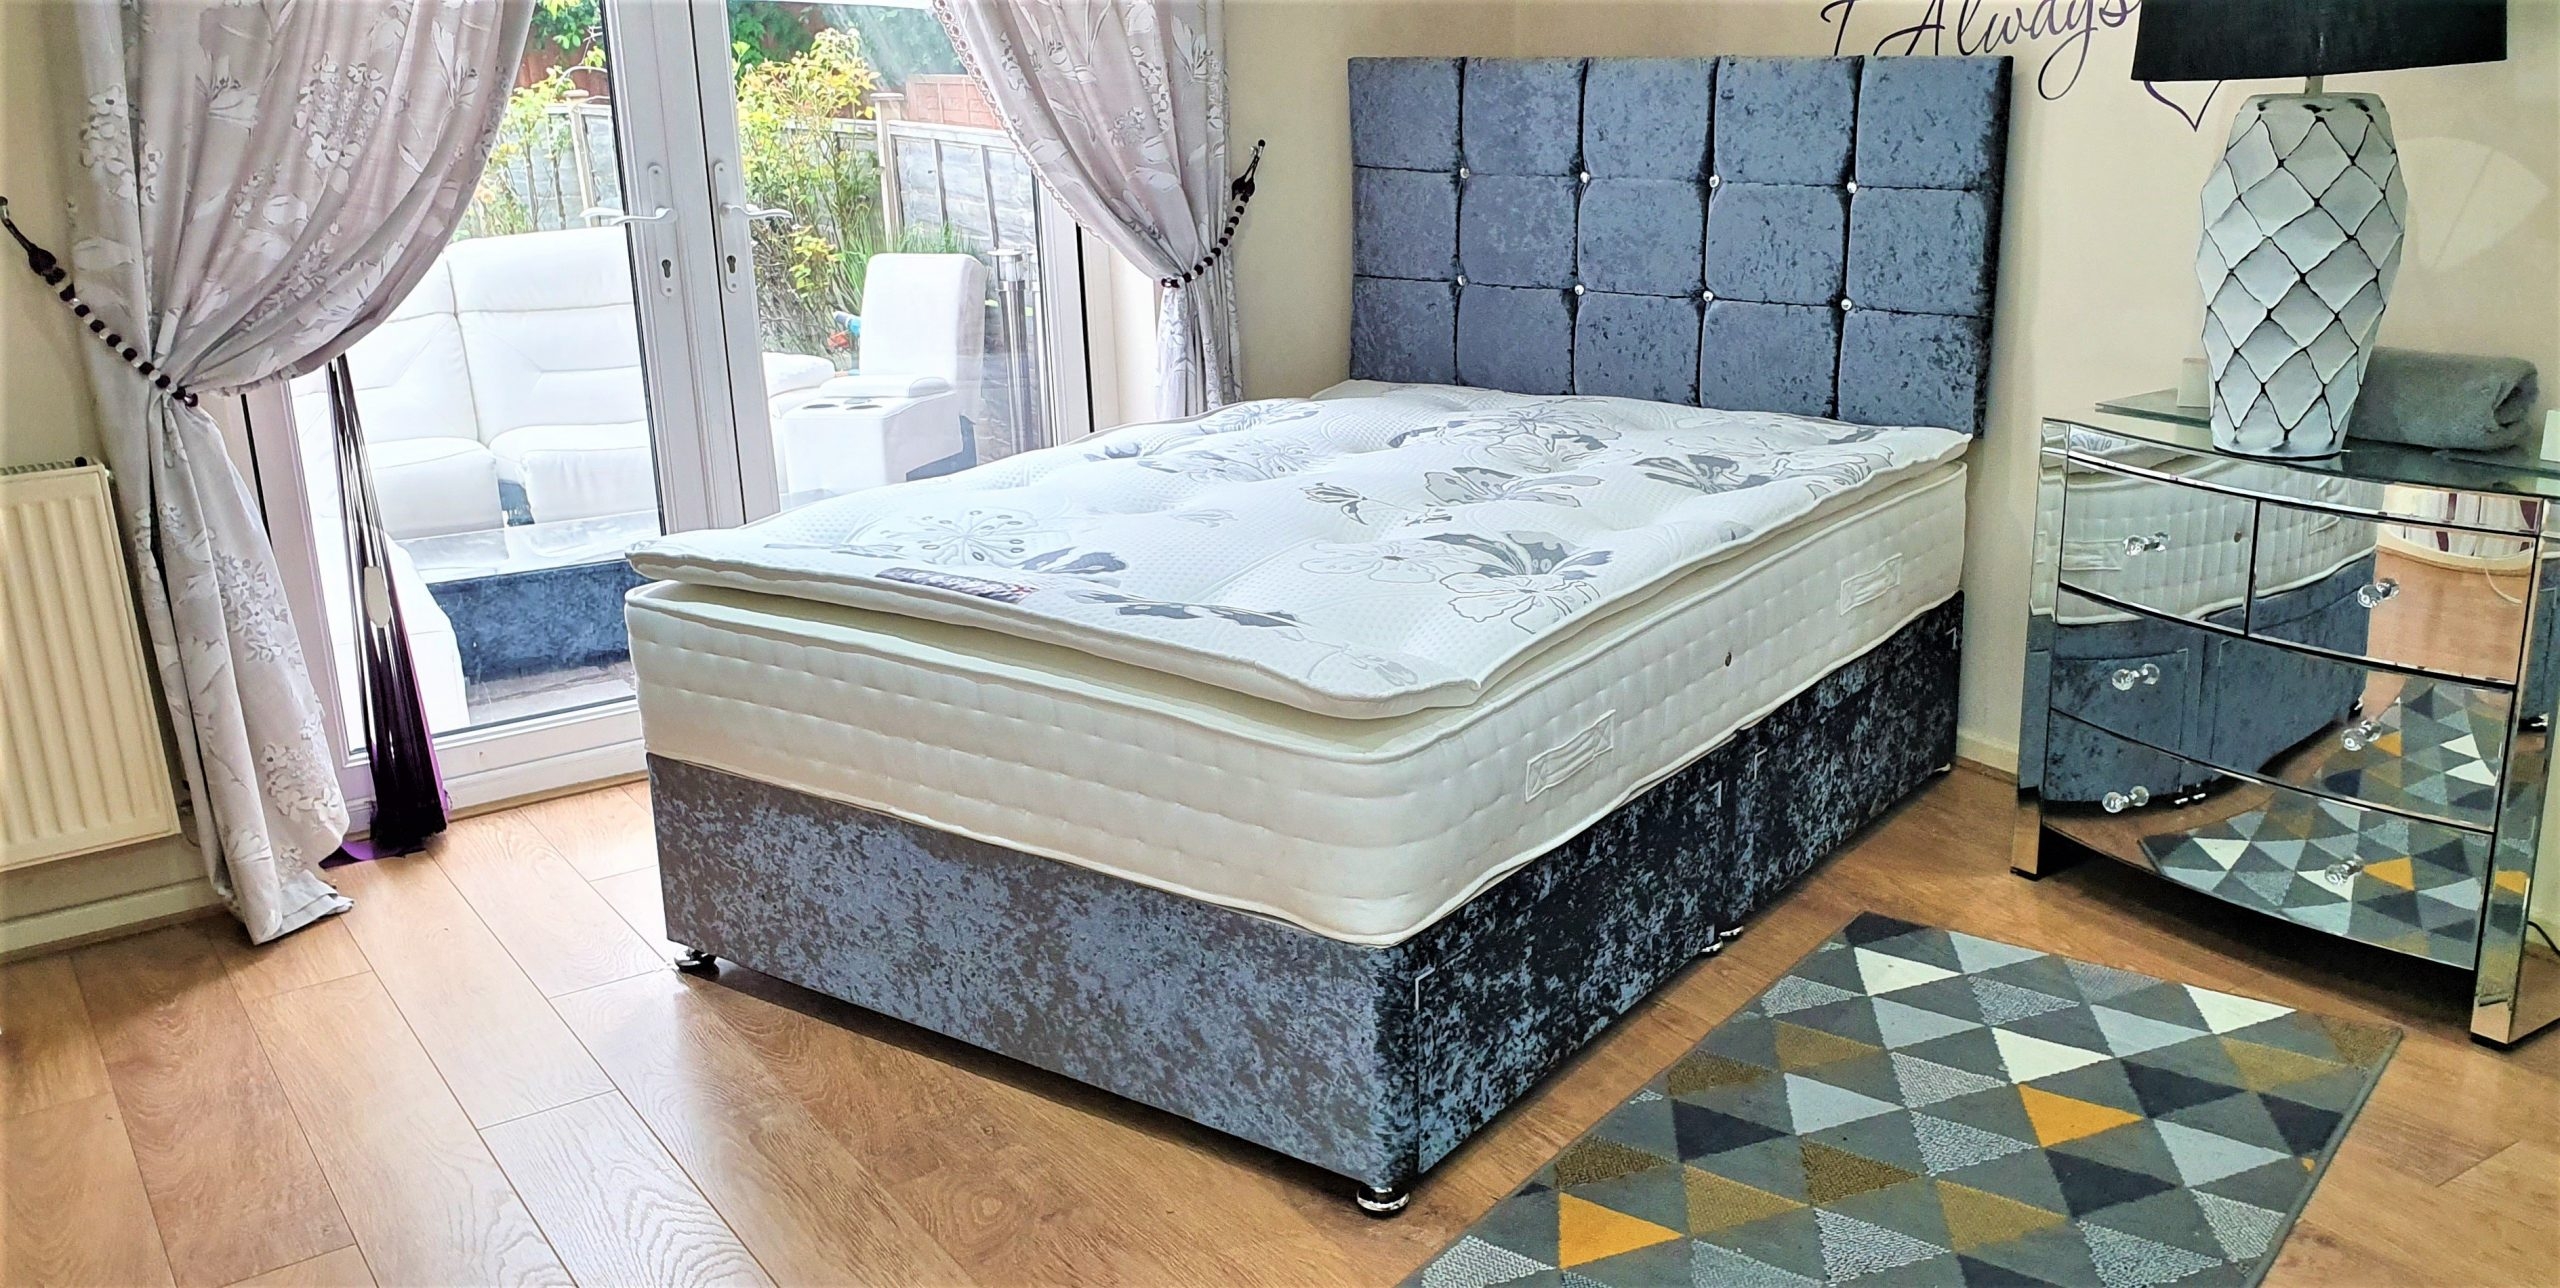 Crushed Velvet Divan Bed – Gun Grey – Single, Small Double, Double, King & Super King Sizes Available – Headboard & Mattress Included